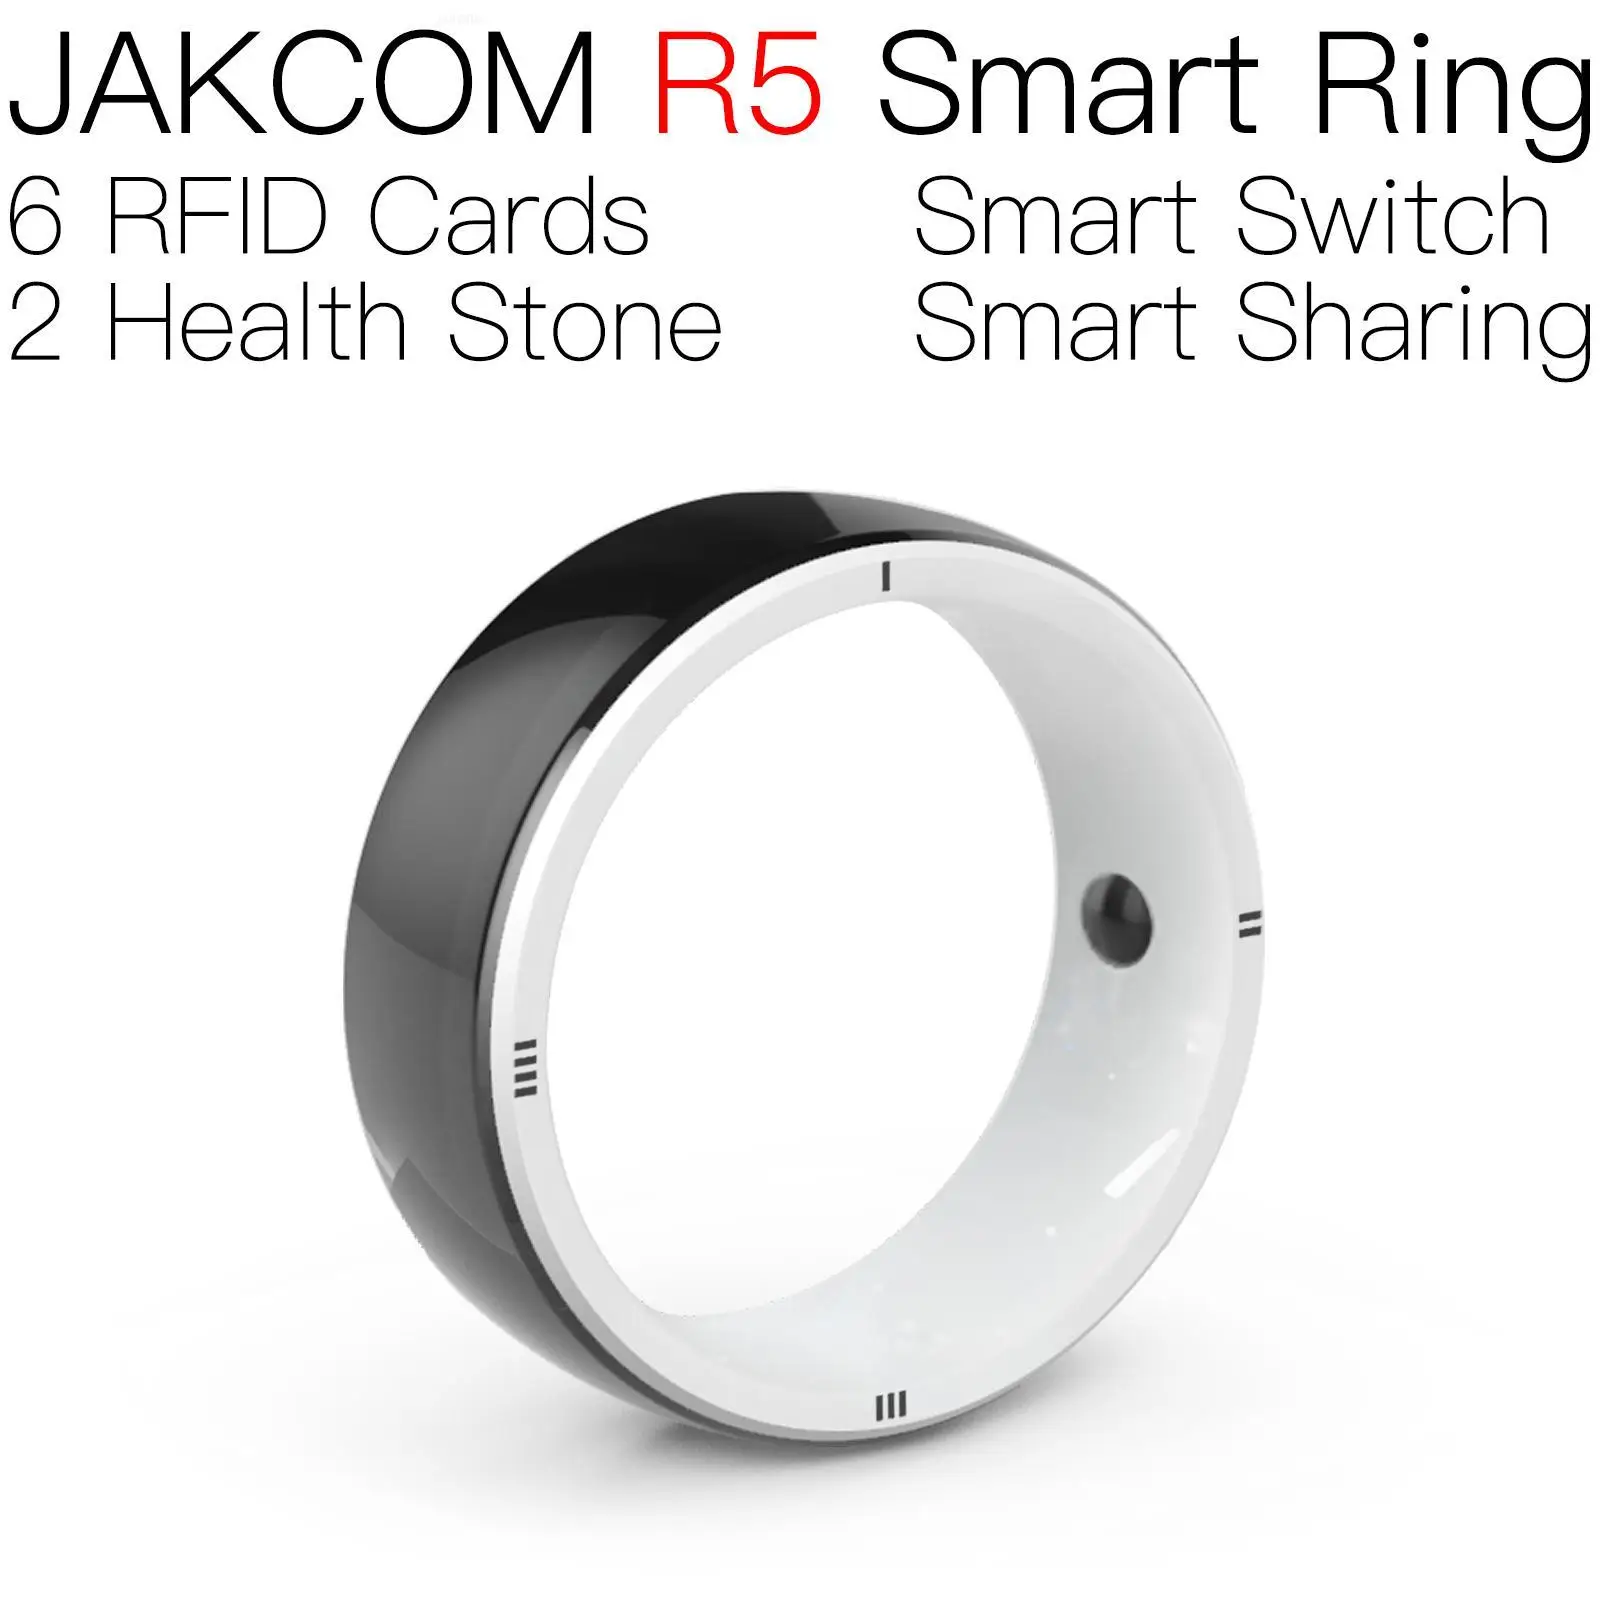 

JAKCOM R5 Smart Ring For men women tag rfid uhf mhz 26 bit iso 6b o epc gen2 white card with chip read ic ear goats stick